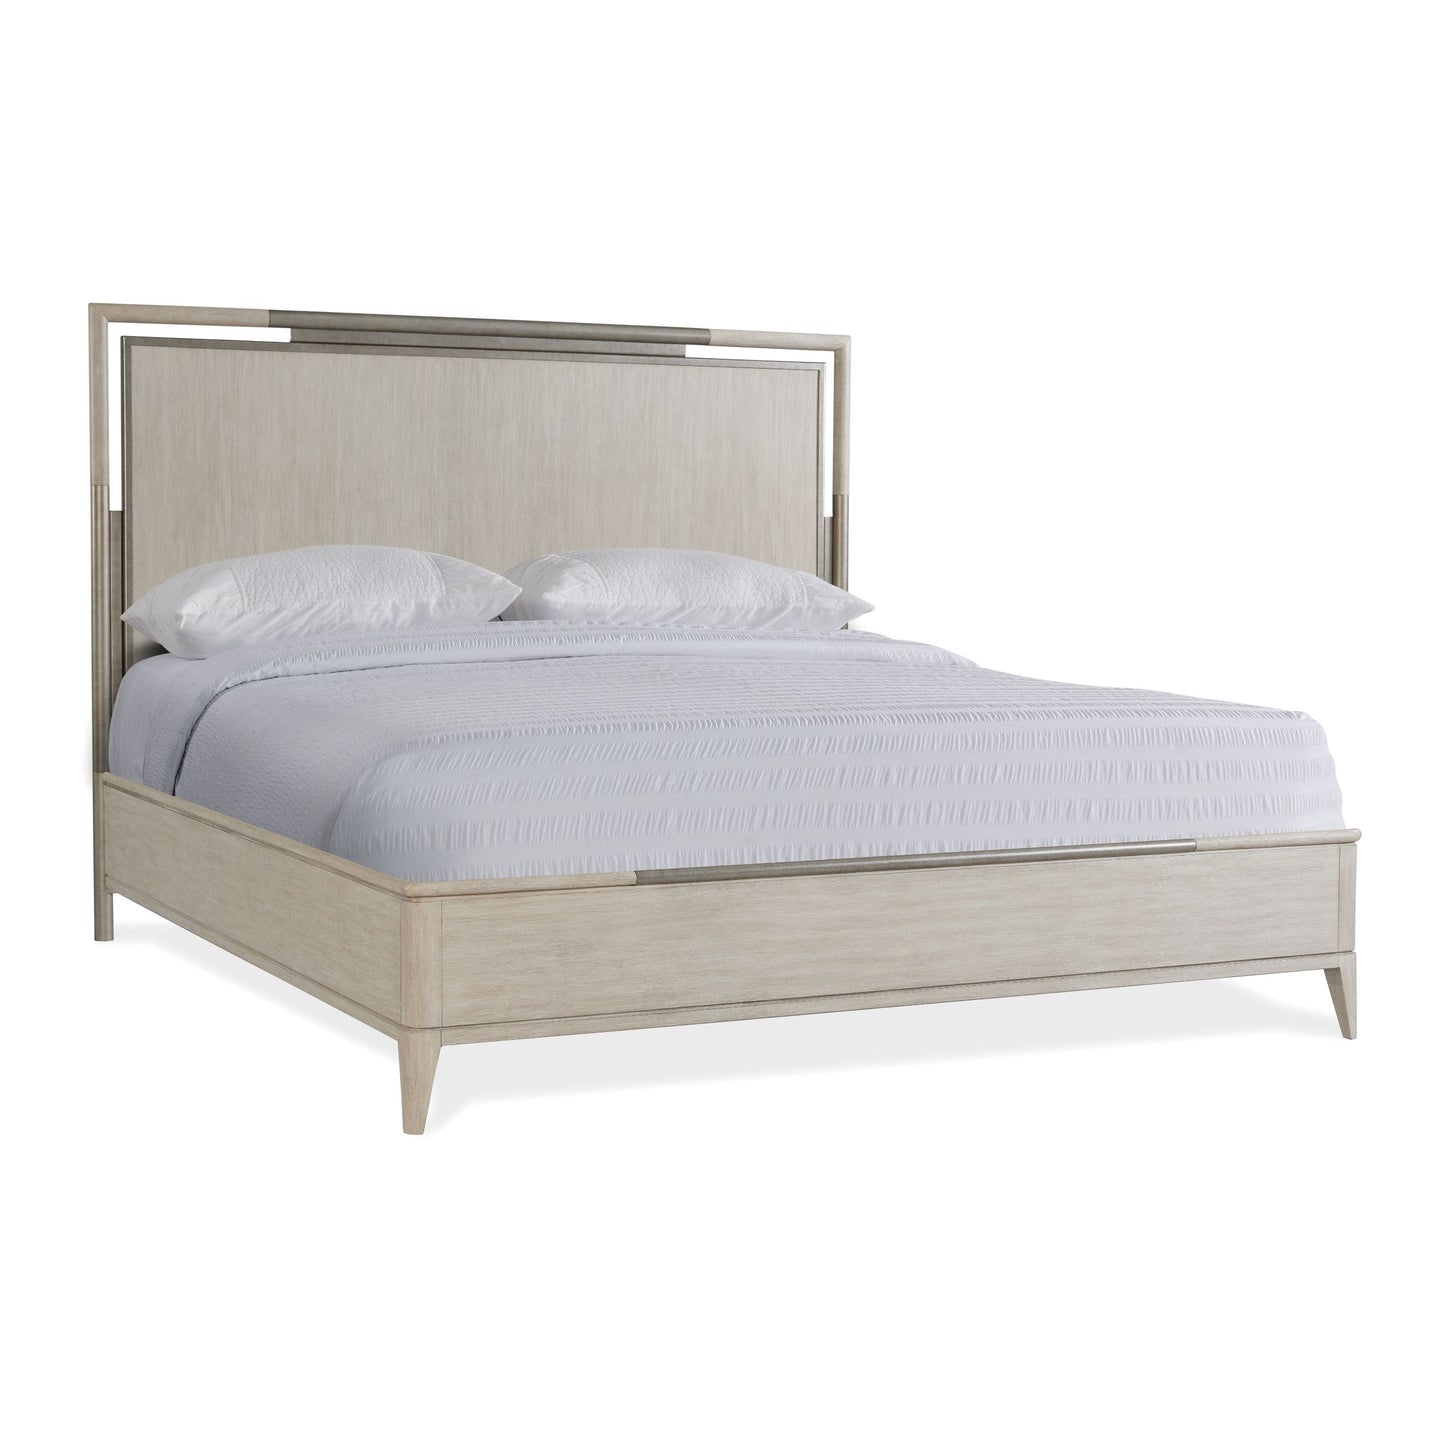 Mantalia Solid Wood Panel Bed with Metal Frame, Champagne